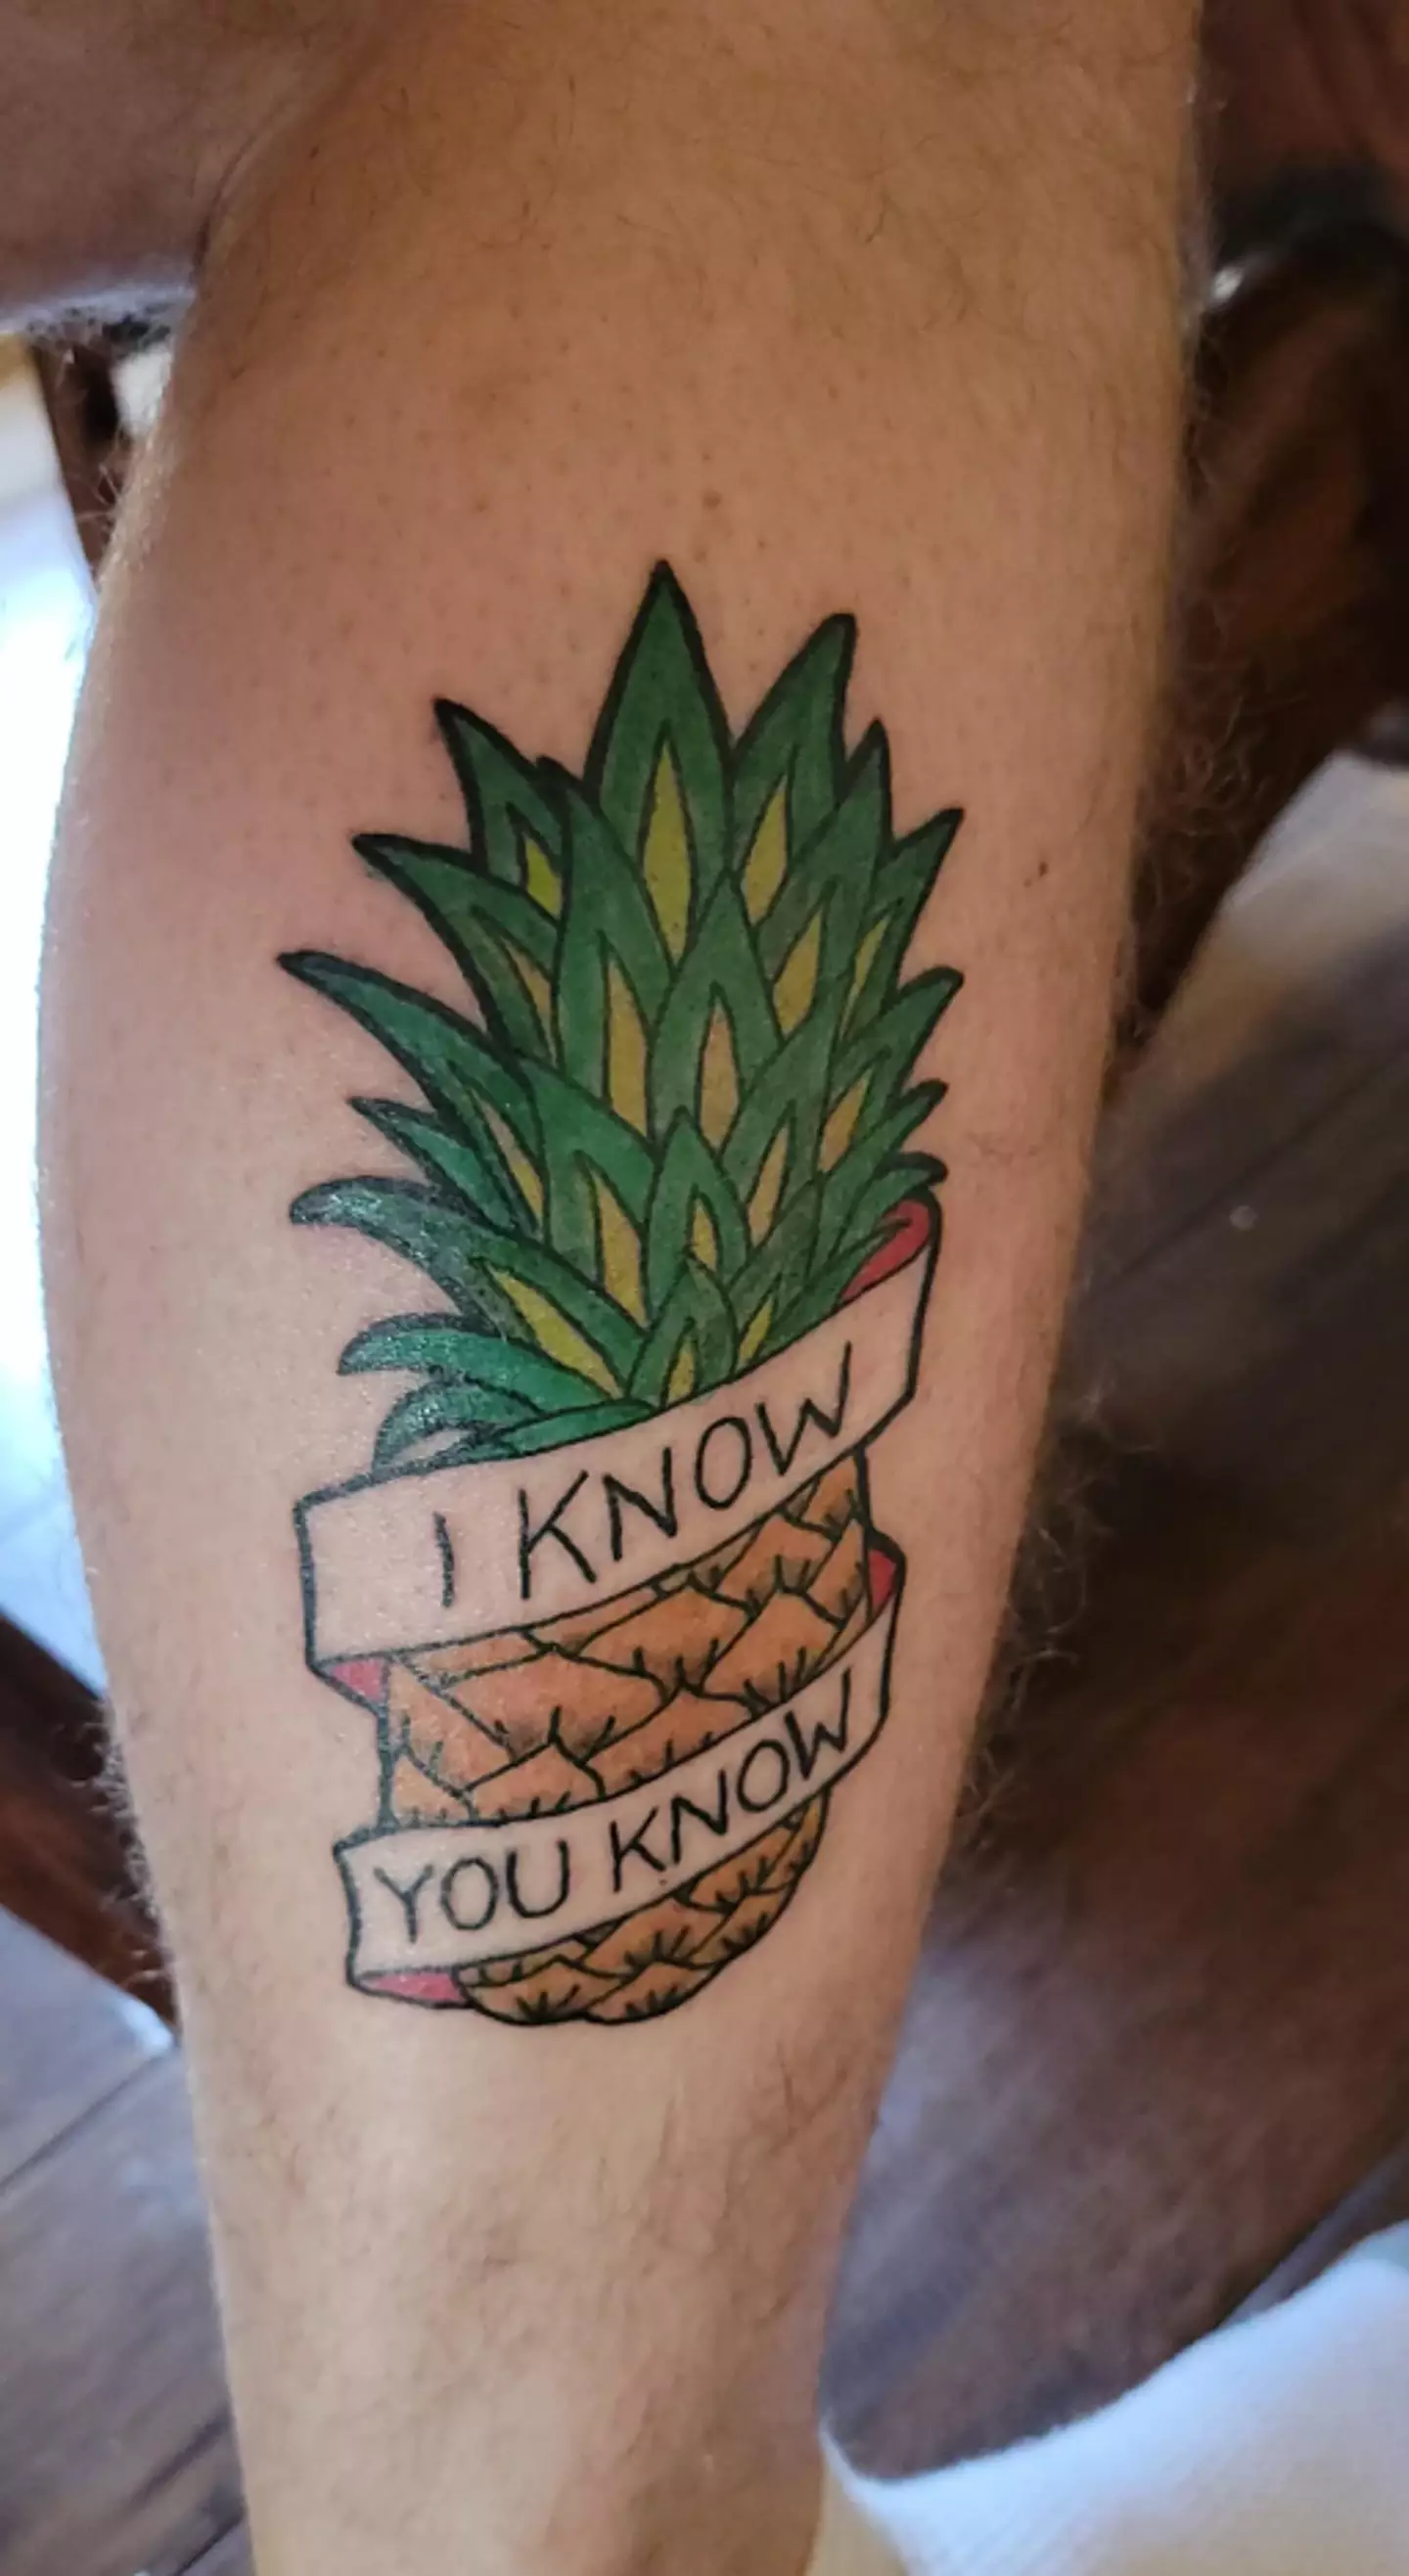 The tattoo was a reference to TV show Psych.